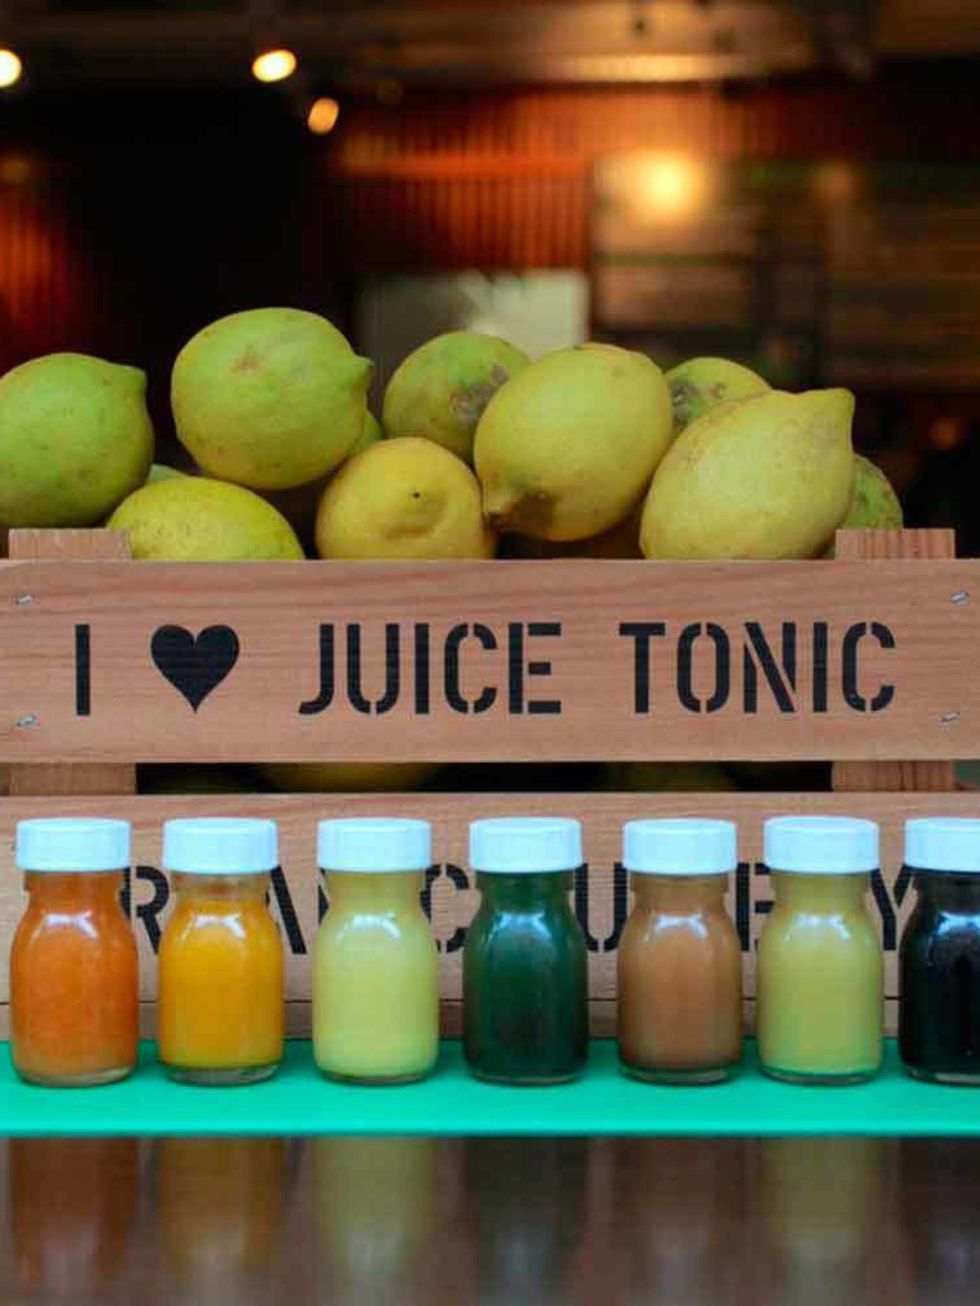 <p><a href="http://www.juicetonic.com/" target="_blank">Juice Tonic</a></p>

<p>What? An organic, cold-pressed, organic juicery in the heart of London.</p>

<p>Why visit? Asides from the super healthy juices, Juice Tonic has a selection of restorative fre